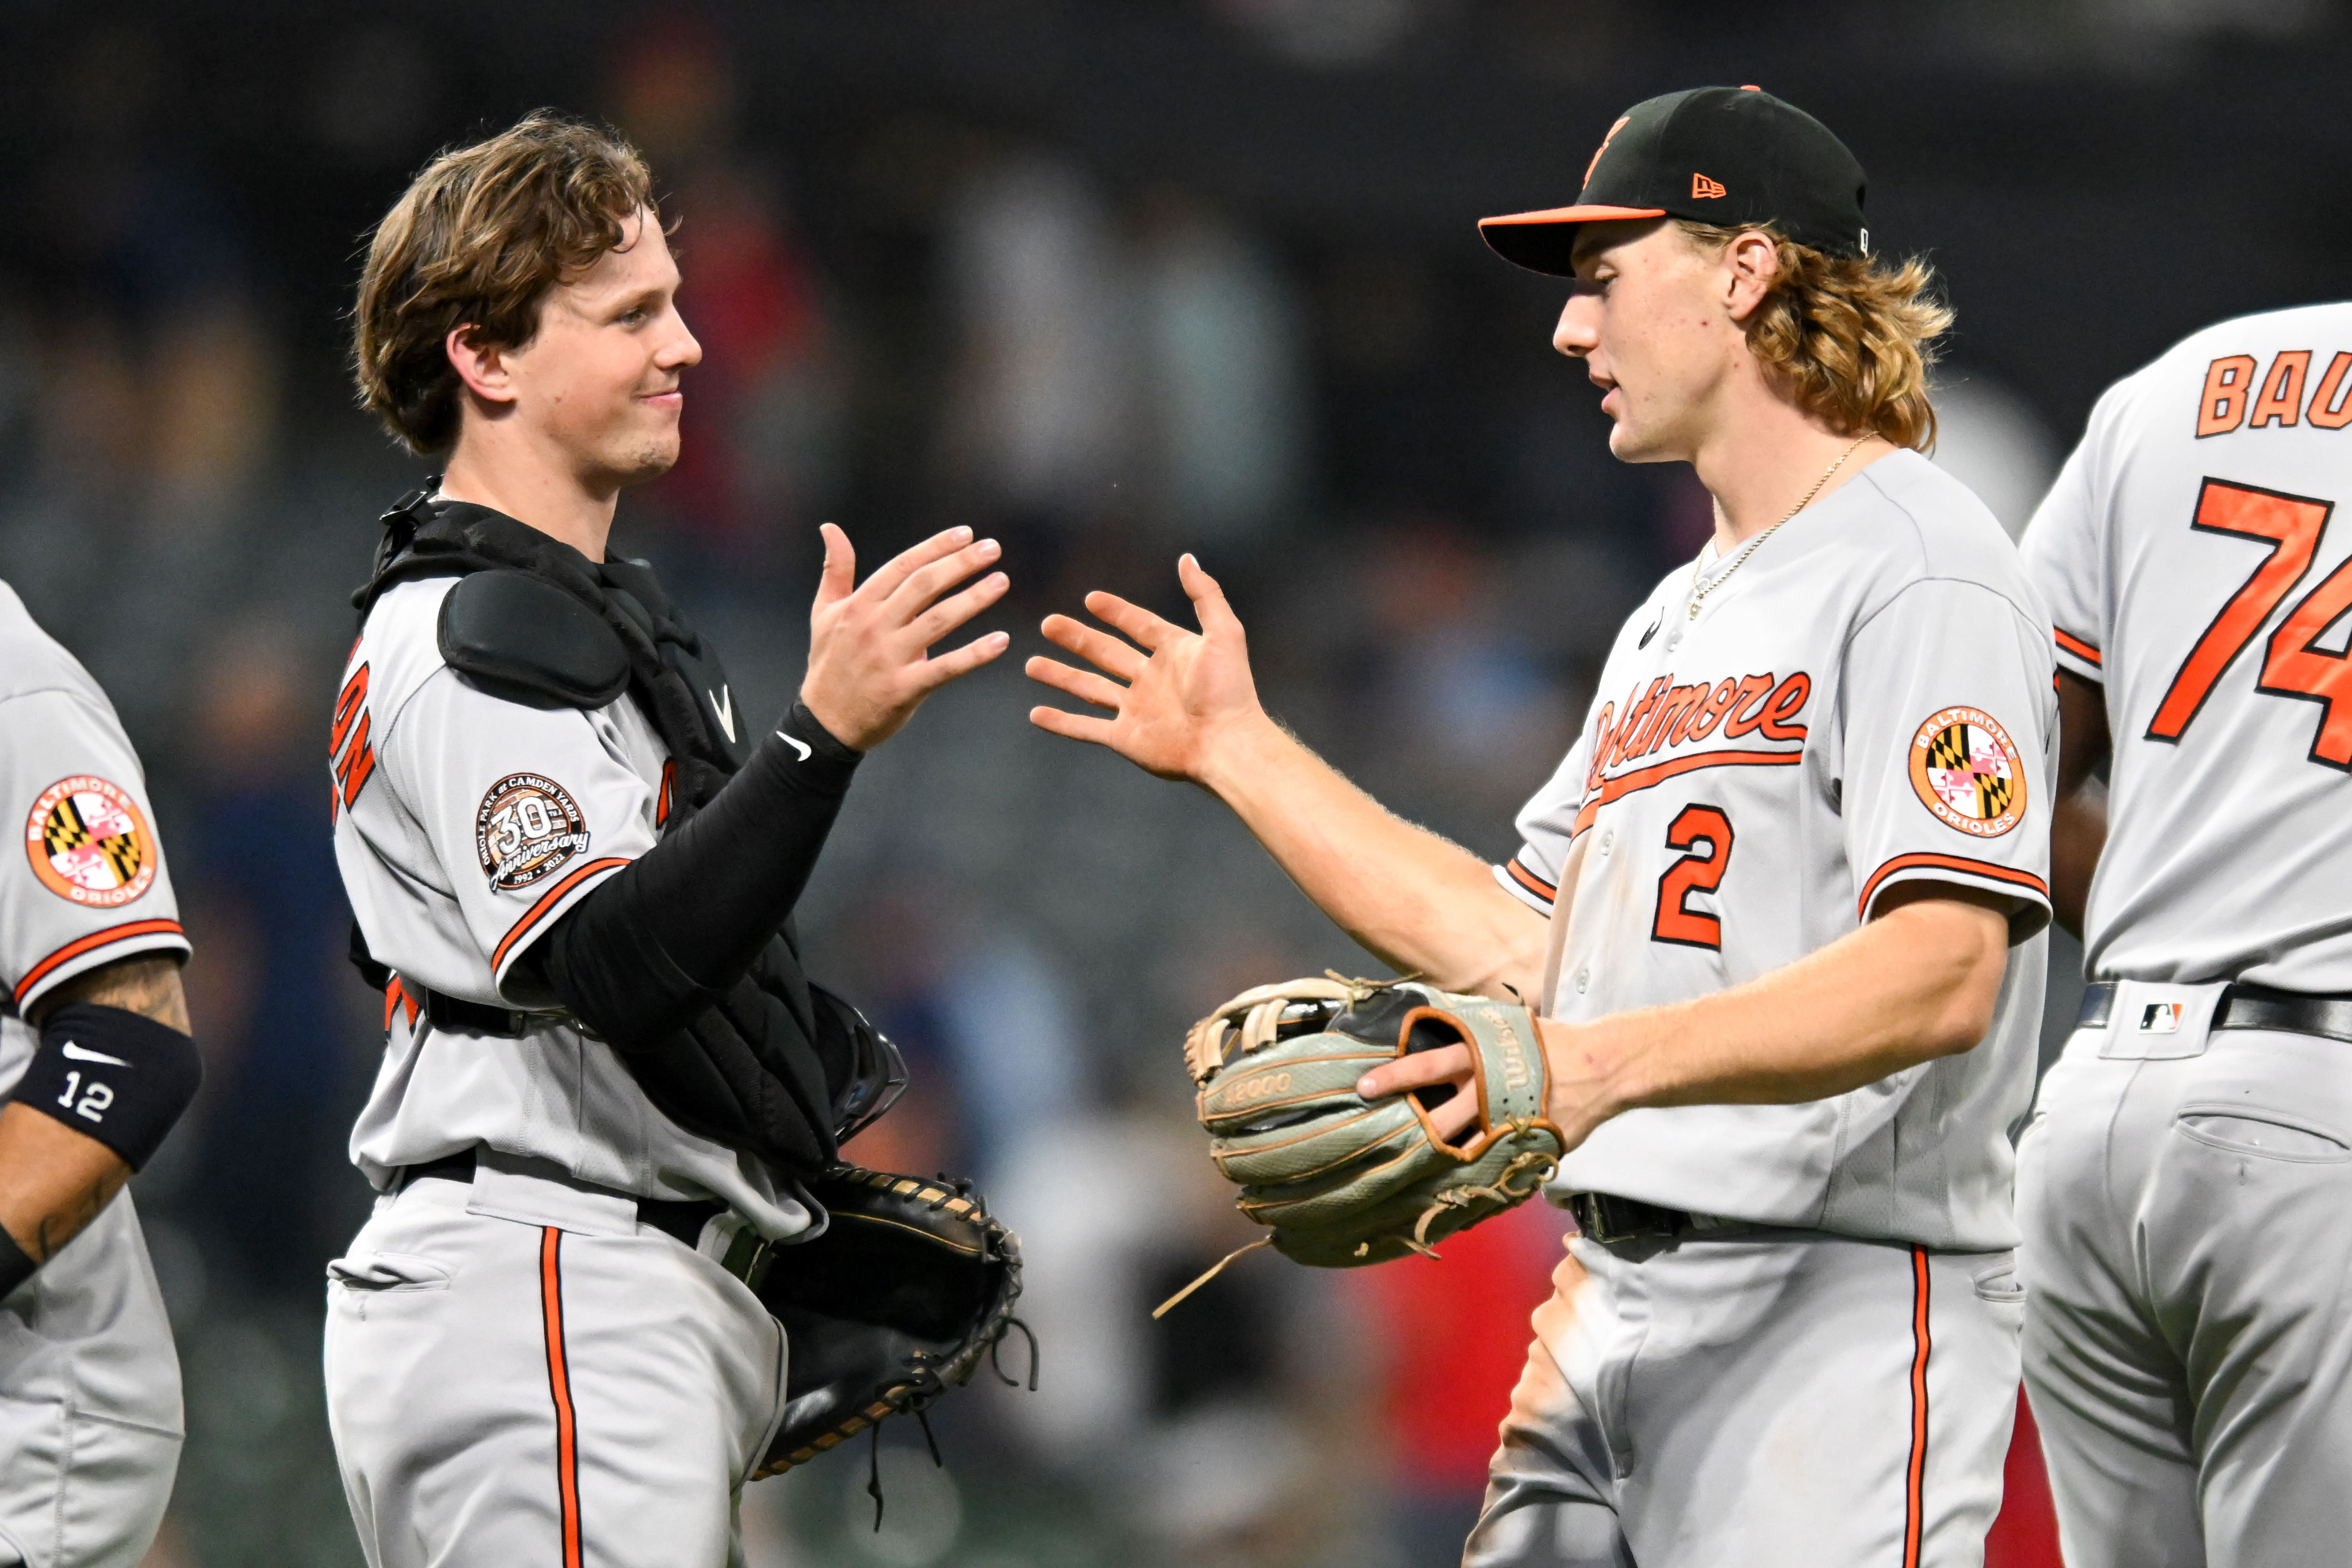 Baltimore Orioles: Where Will We See The Most Improvement In 2020?